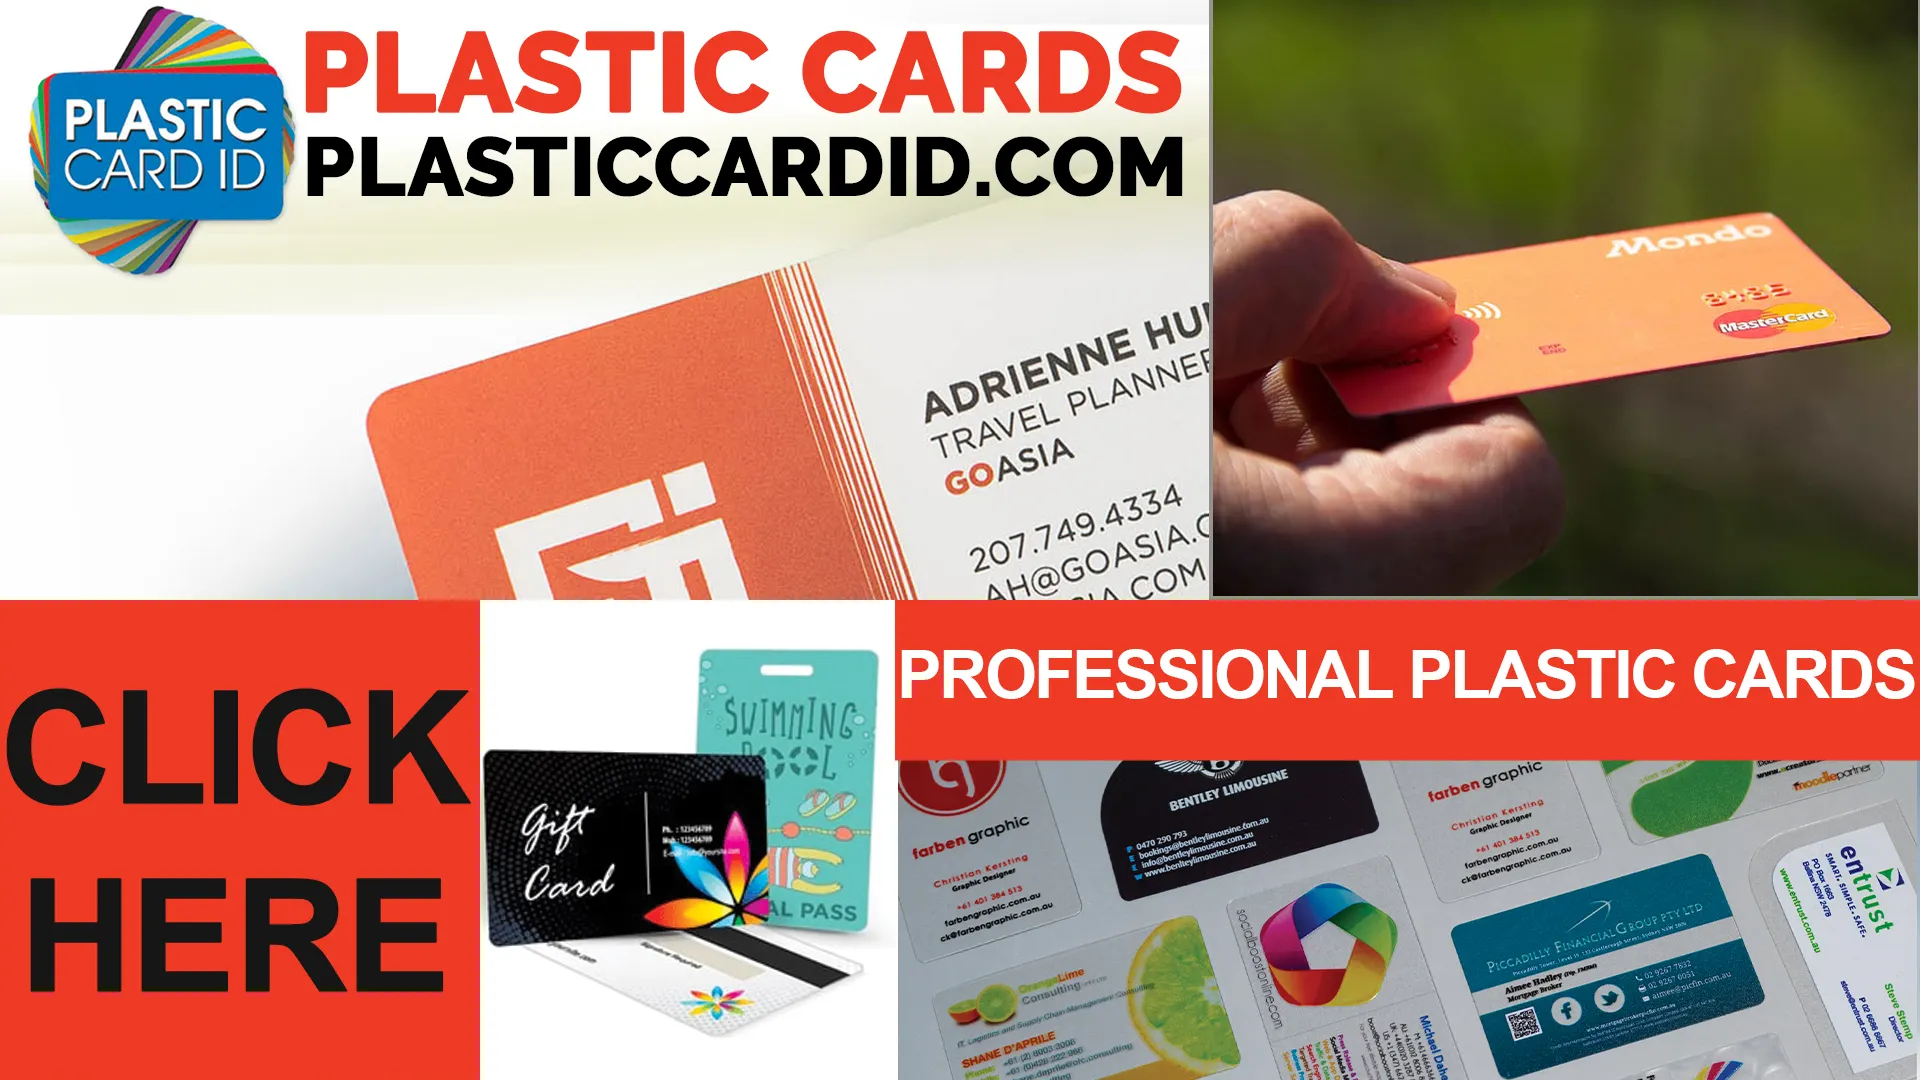 Your Guide to Plastic Card Permanence